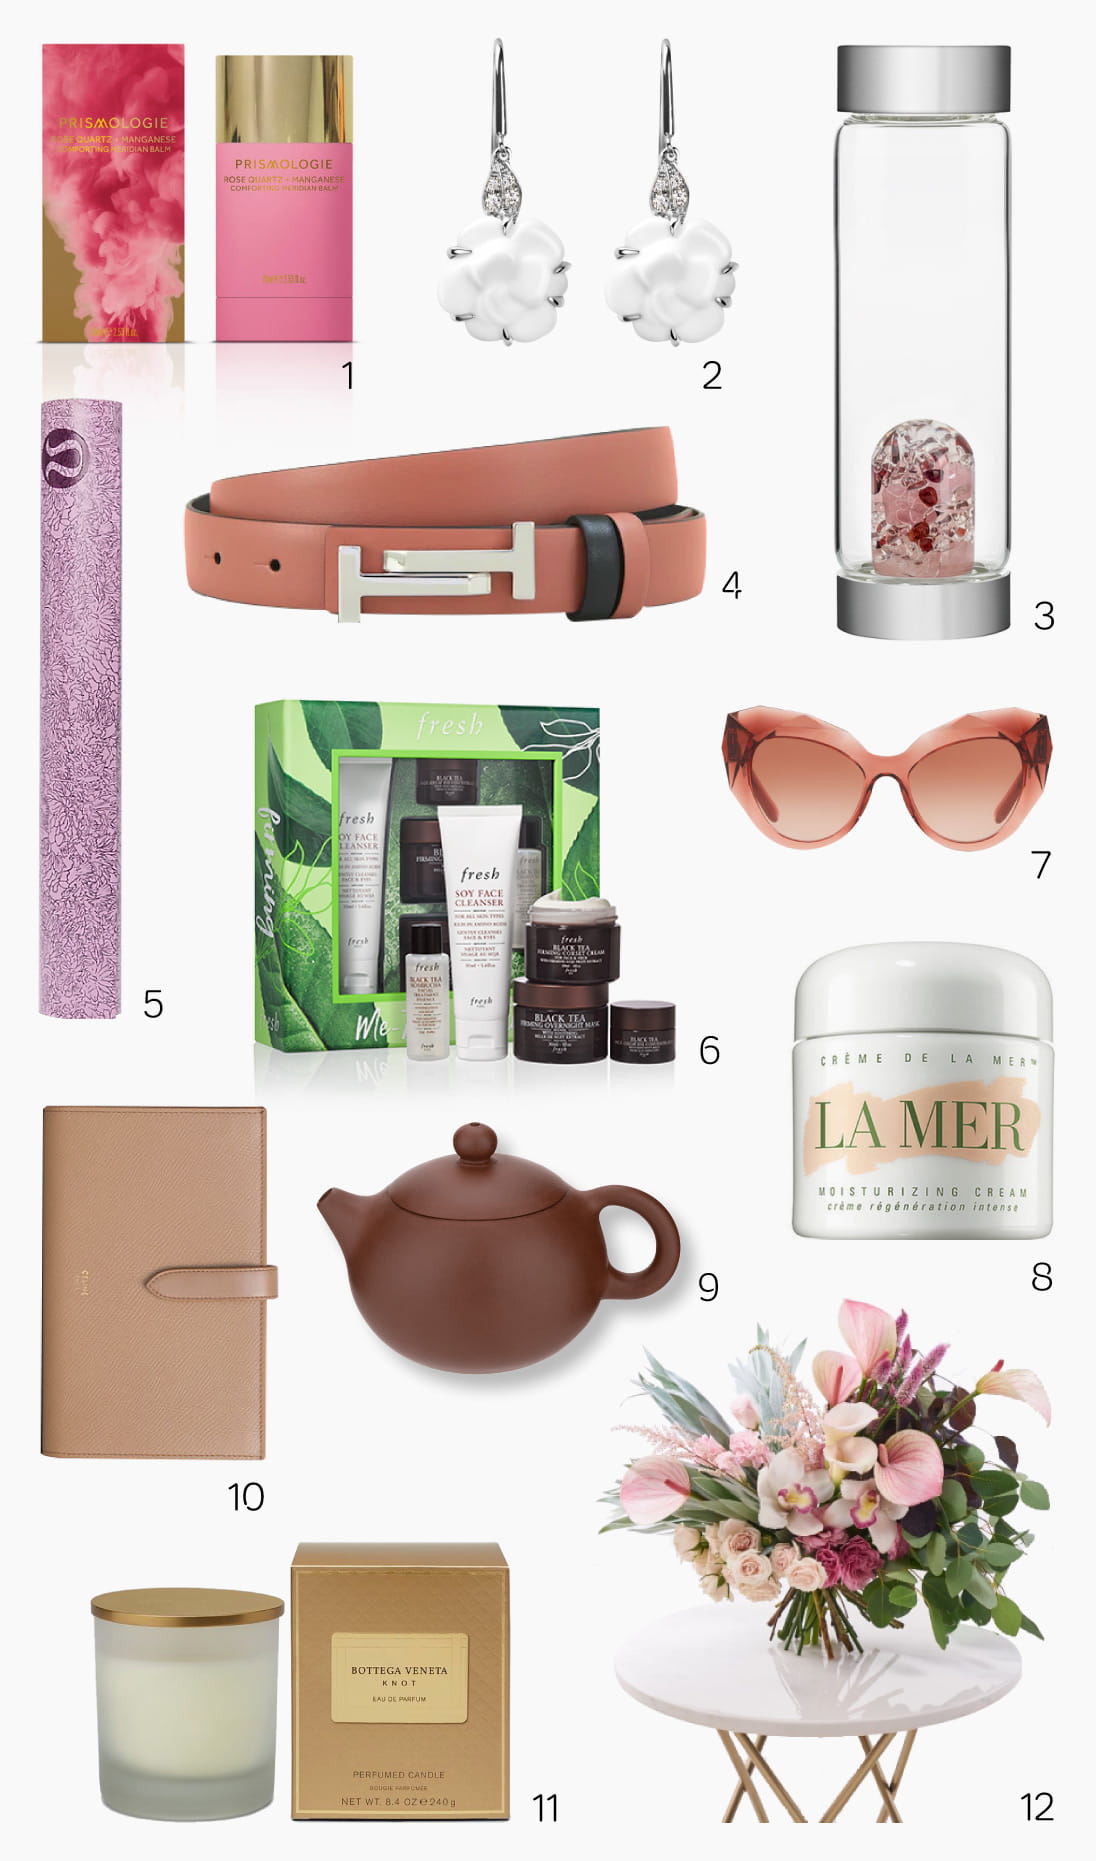 The Style Sheet rounds up the ultimate ‘want-not-need’ Mother’s Day gift ideas, all set to delight the most important woman in your lif